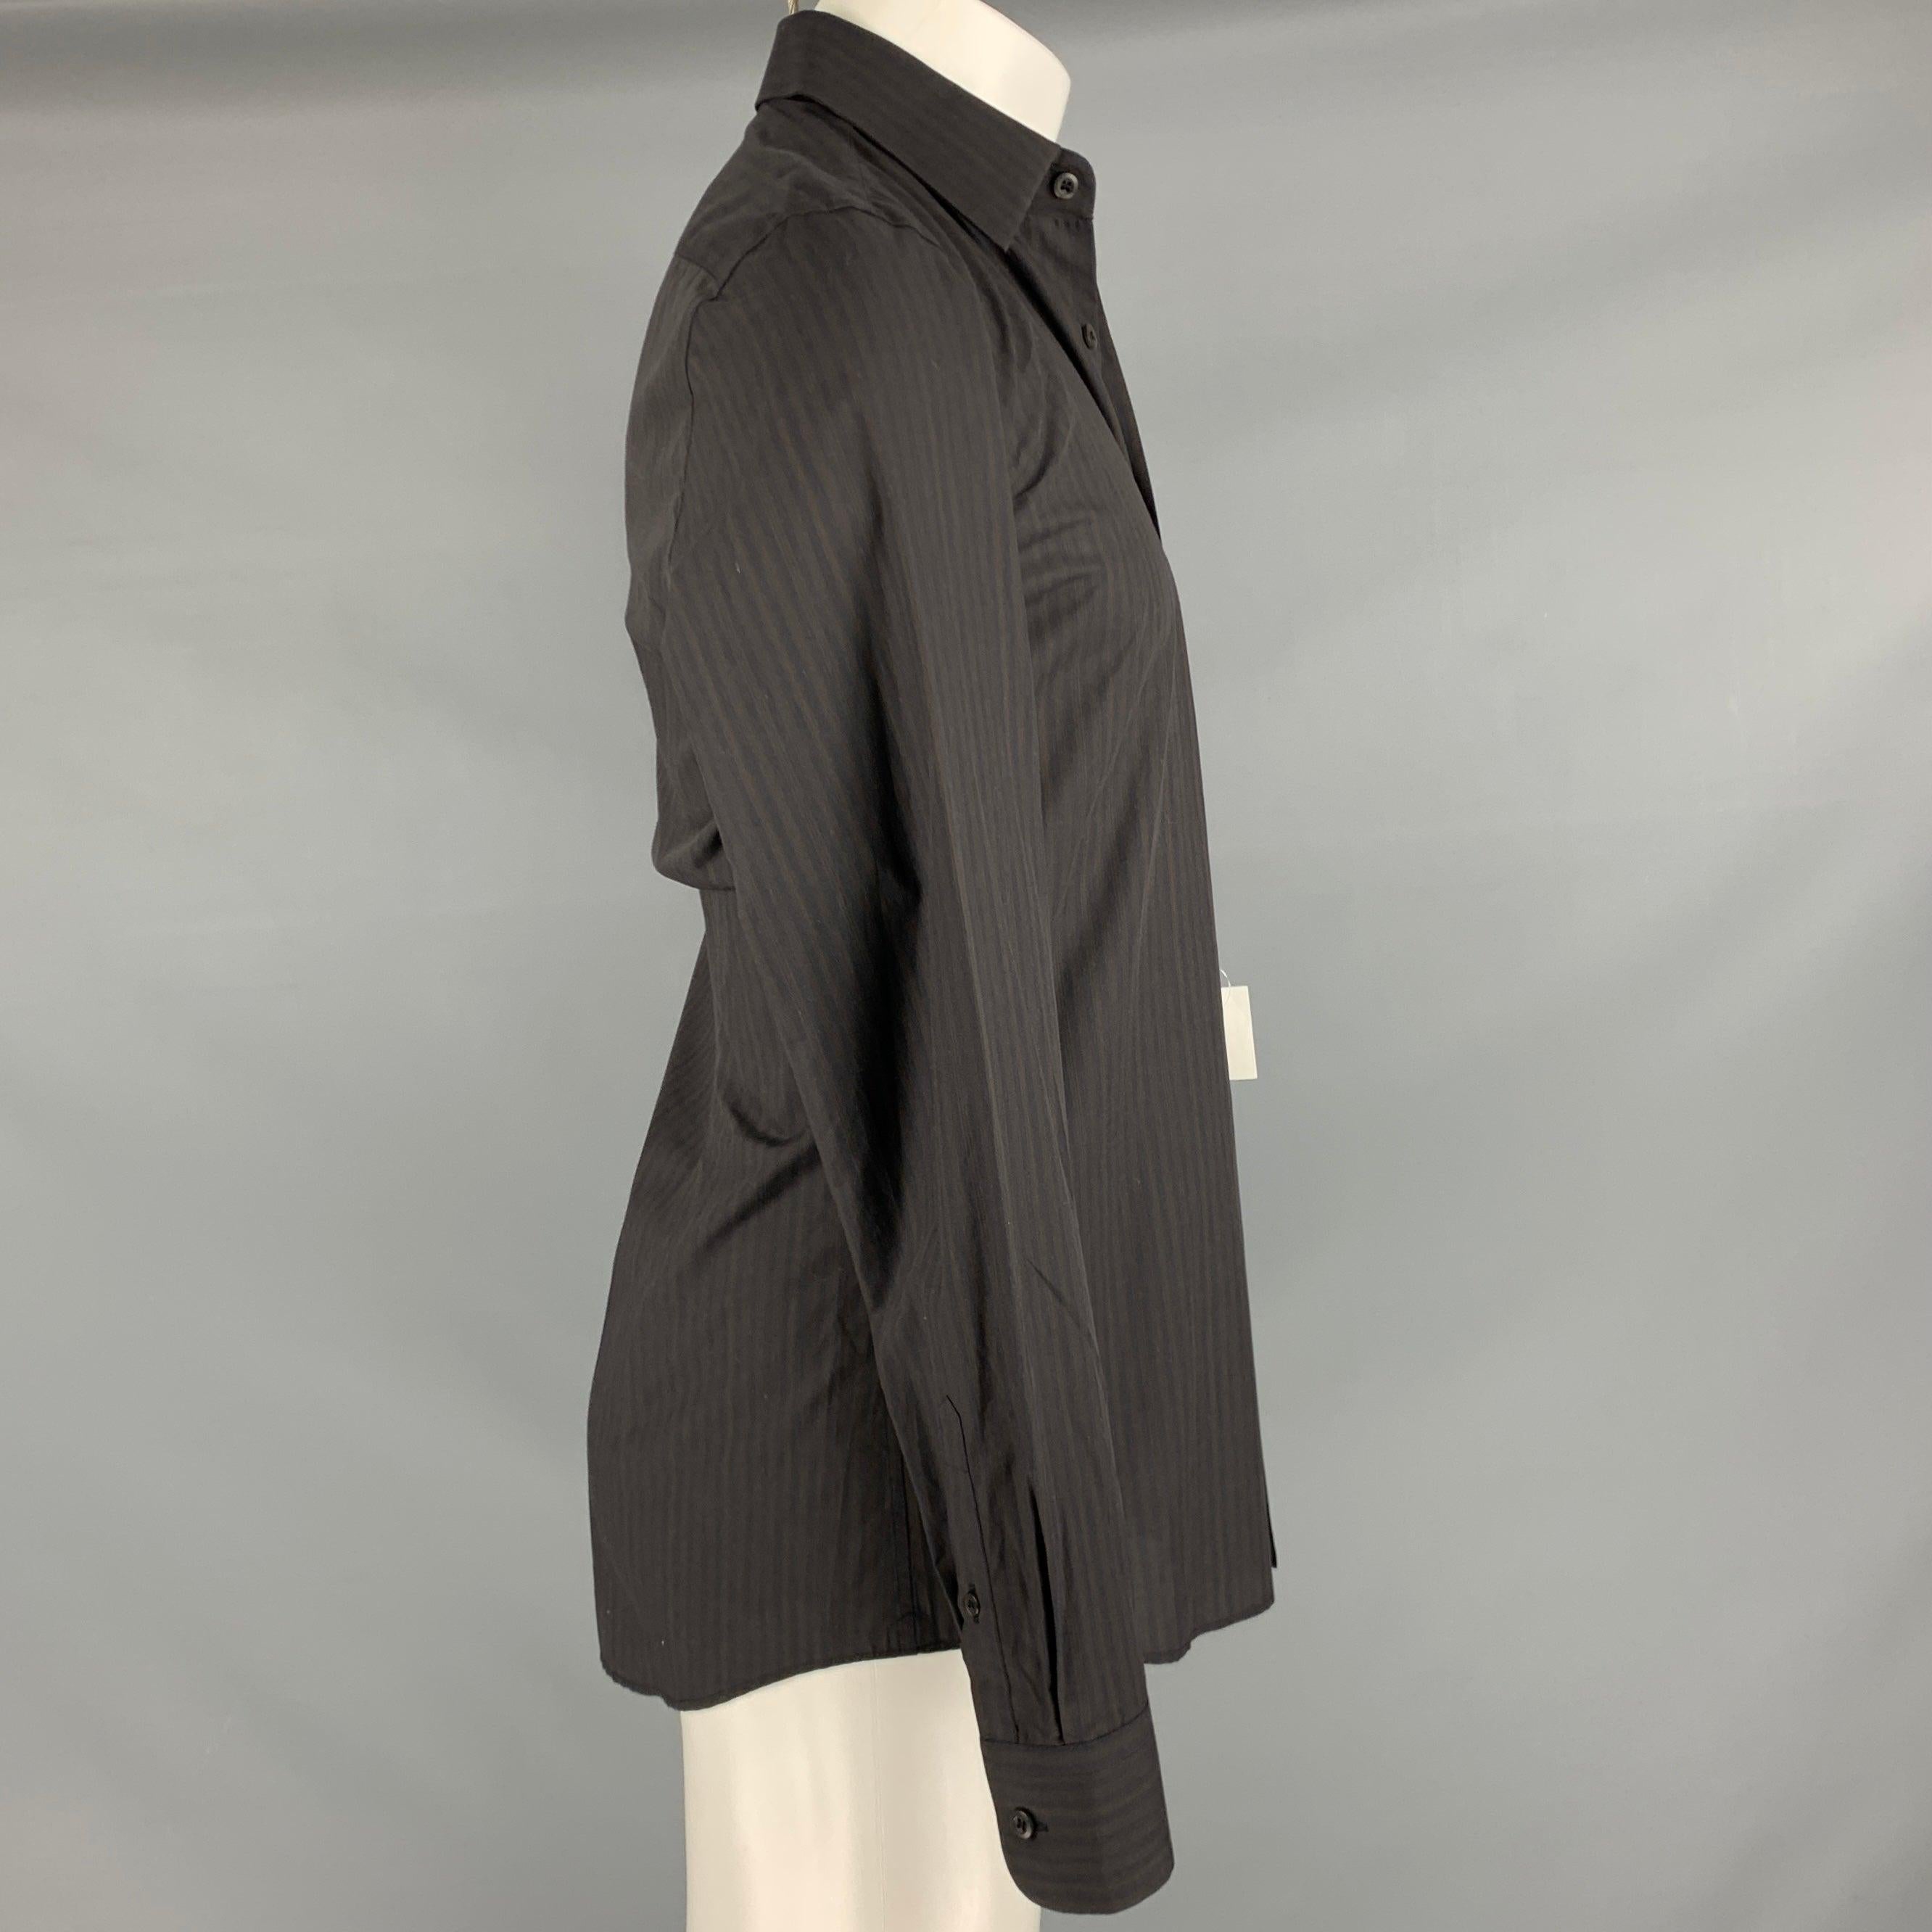 PRADA long sleeve shirt
in a brown and black cotton fabric featuring a vertical stripe pattern, spread collar, and button closure. Made in Italy.New with Tags. 

Marked:   38/15 

Measurements: 
 
Shoulder: 16.5 inches Chest: 40 inches Sleeve: 26.5